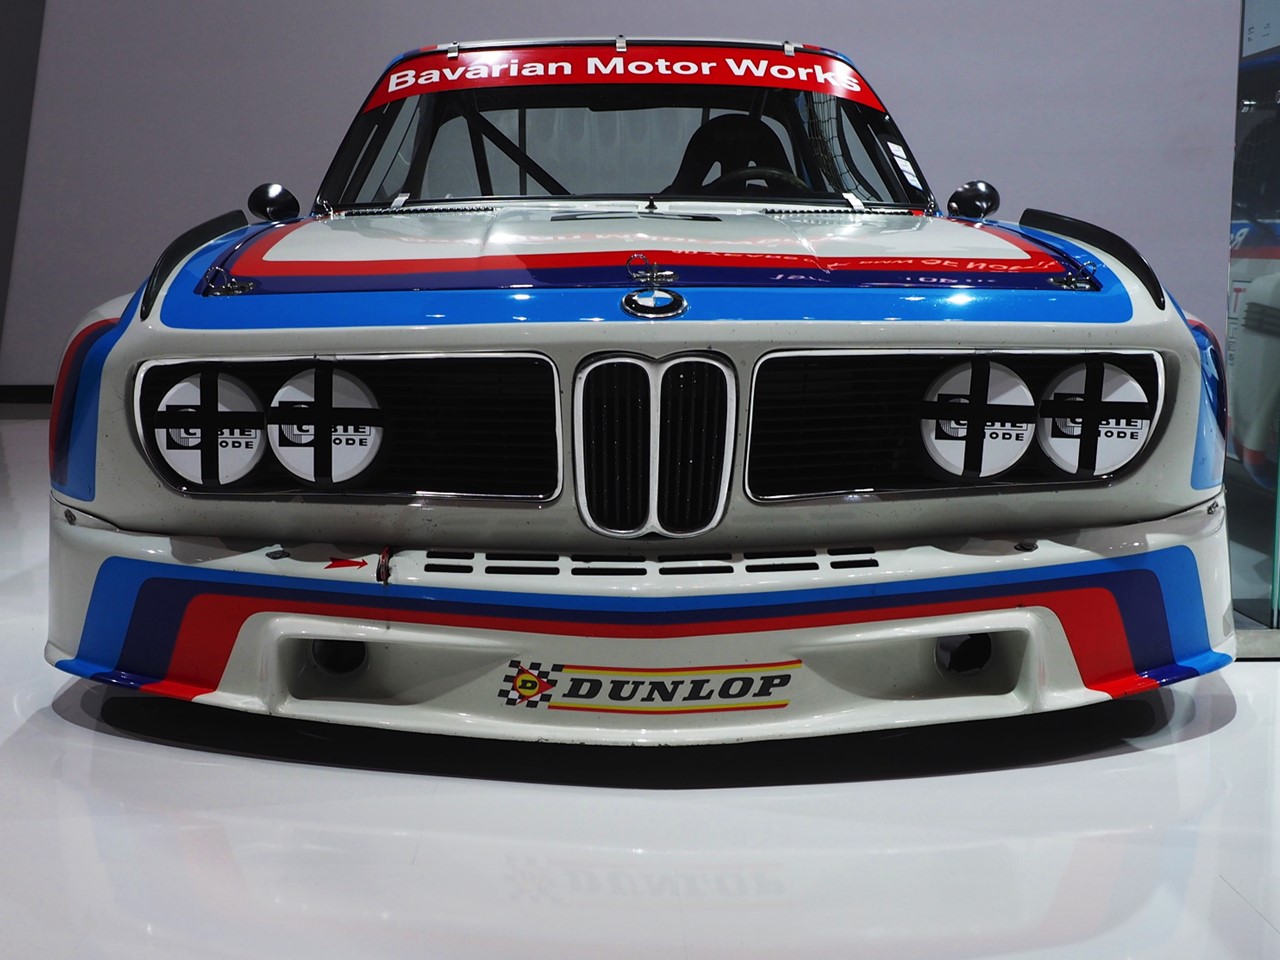 The Class of 2015: BMW 3.0 CSL